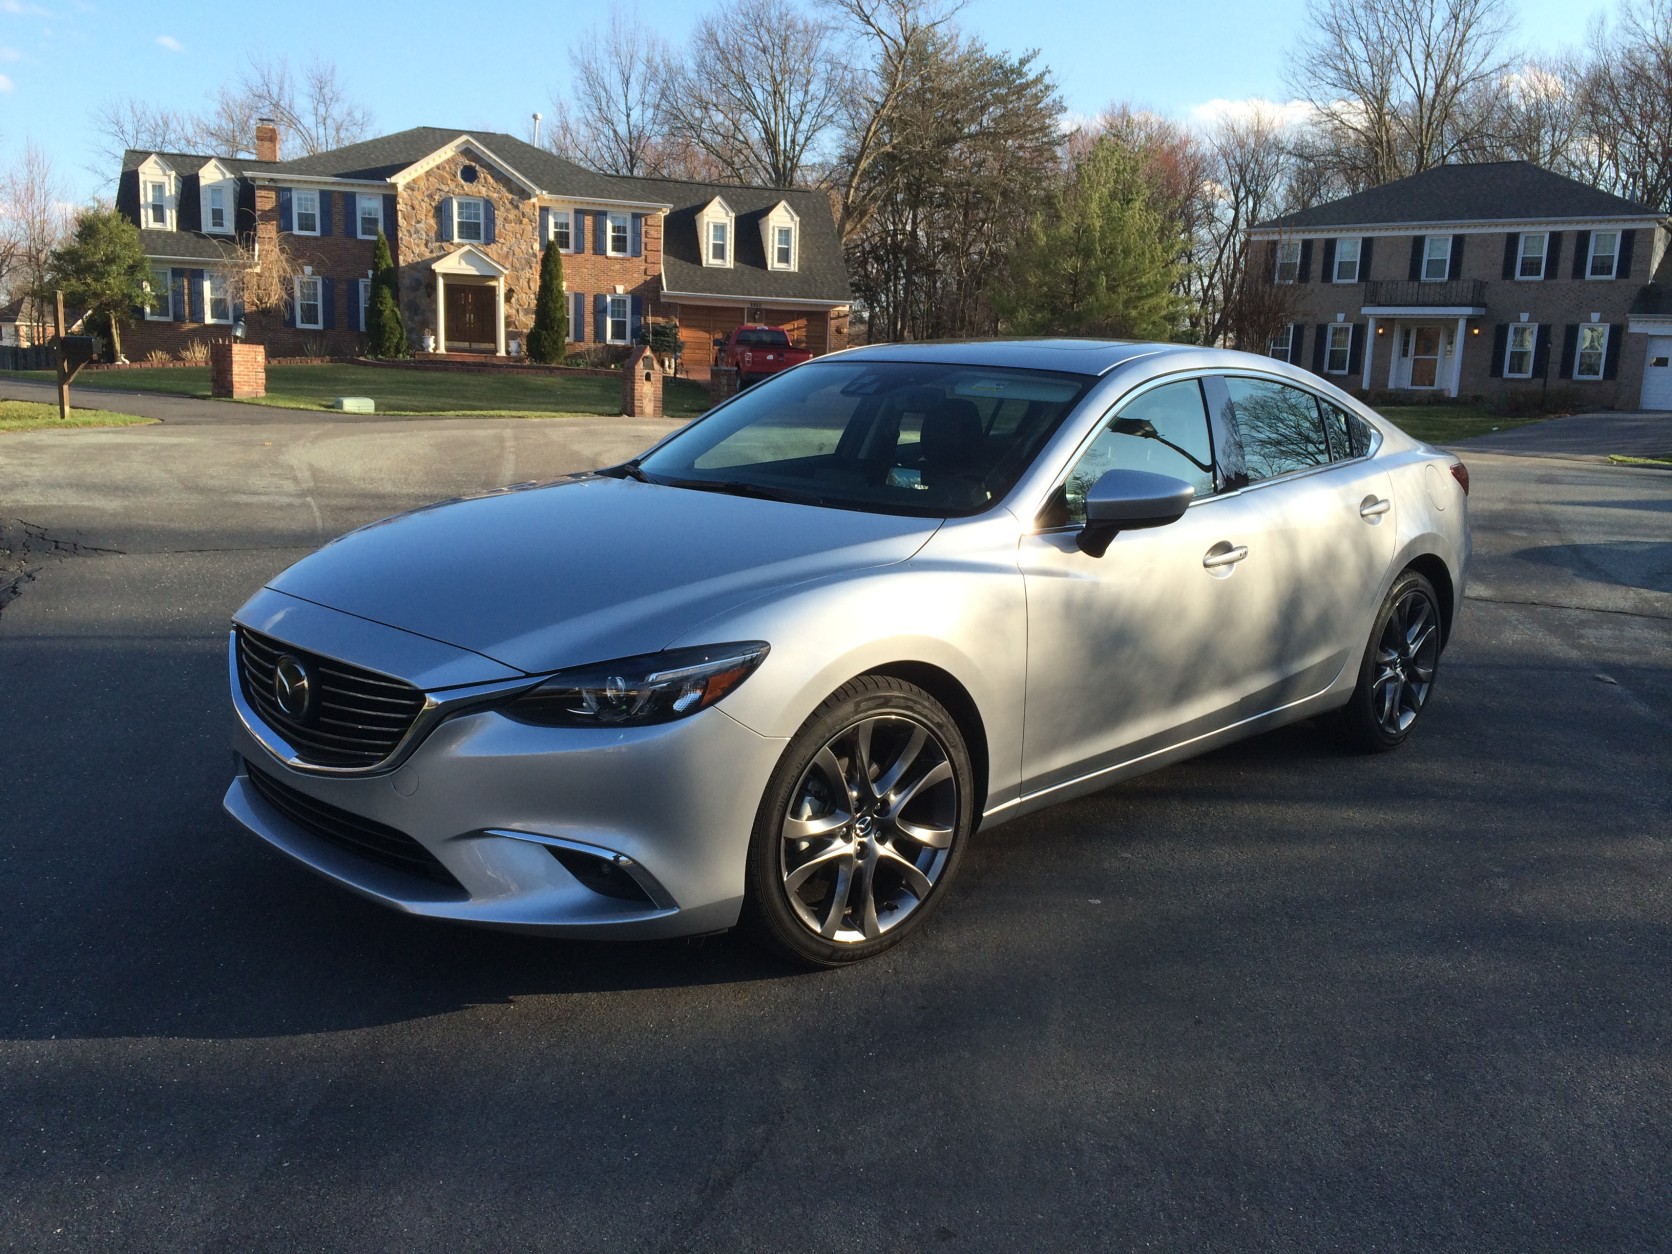 The 2016 Mazda 6 offers good space and standout good looks to help set it apart from the rest of the class. (WTOP/Mike Parris)